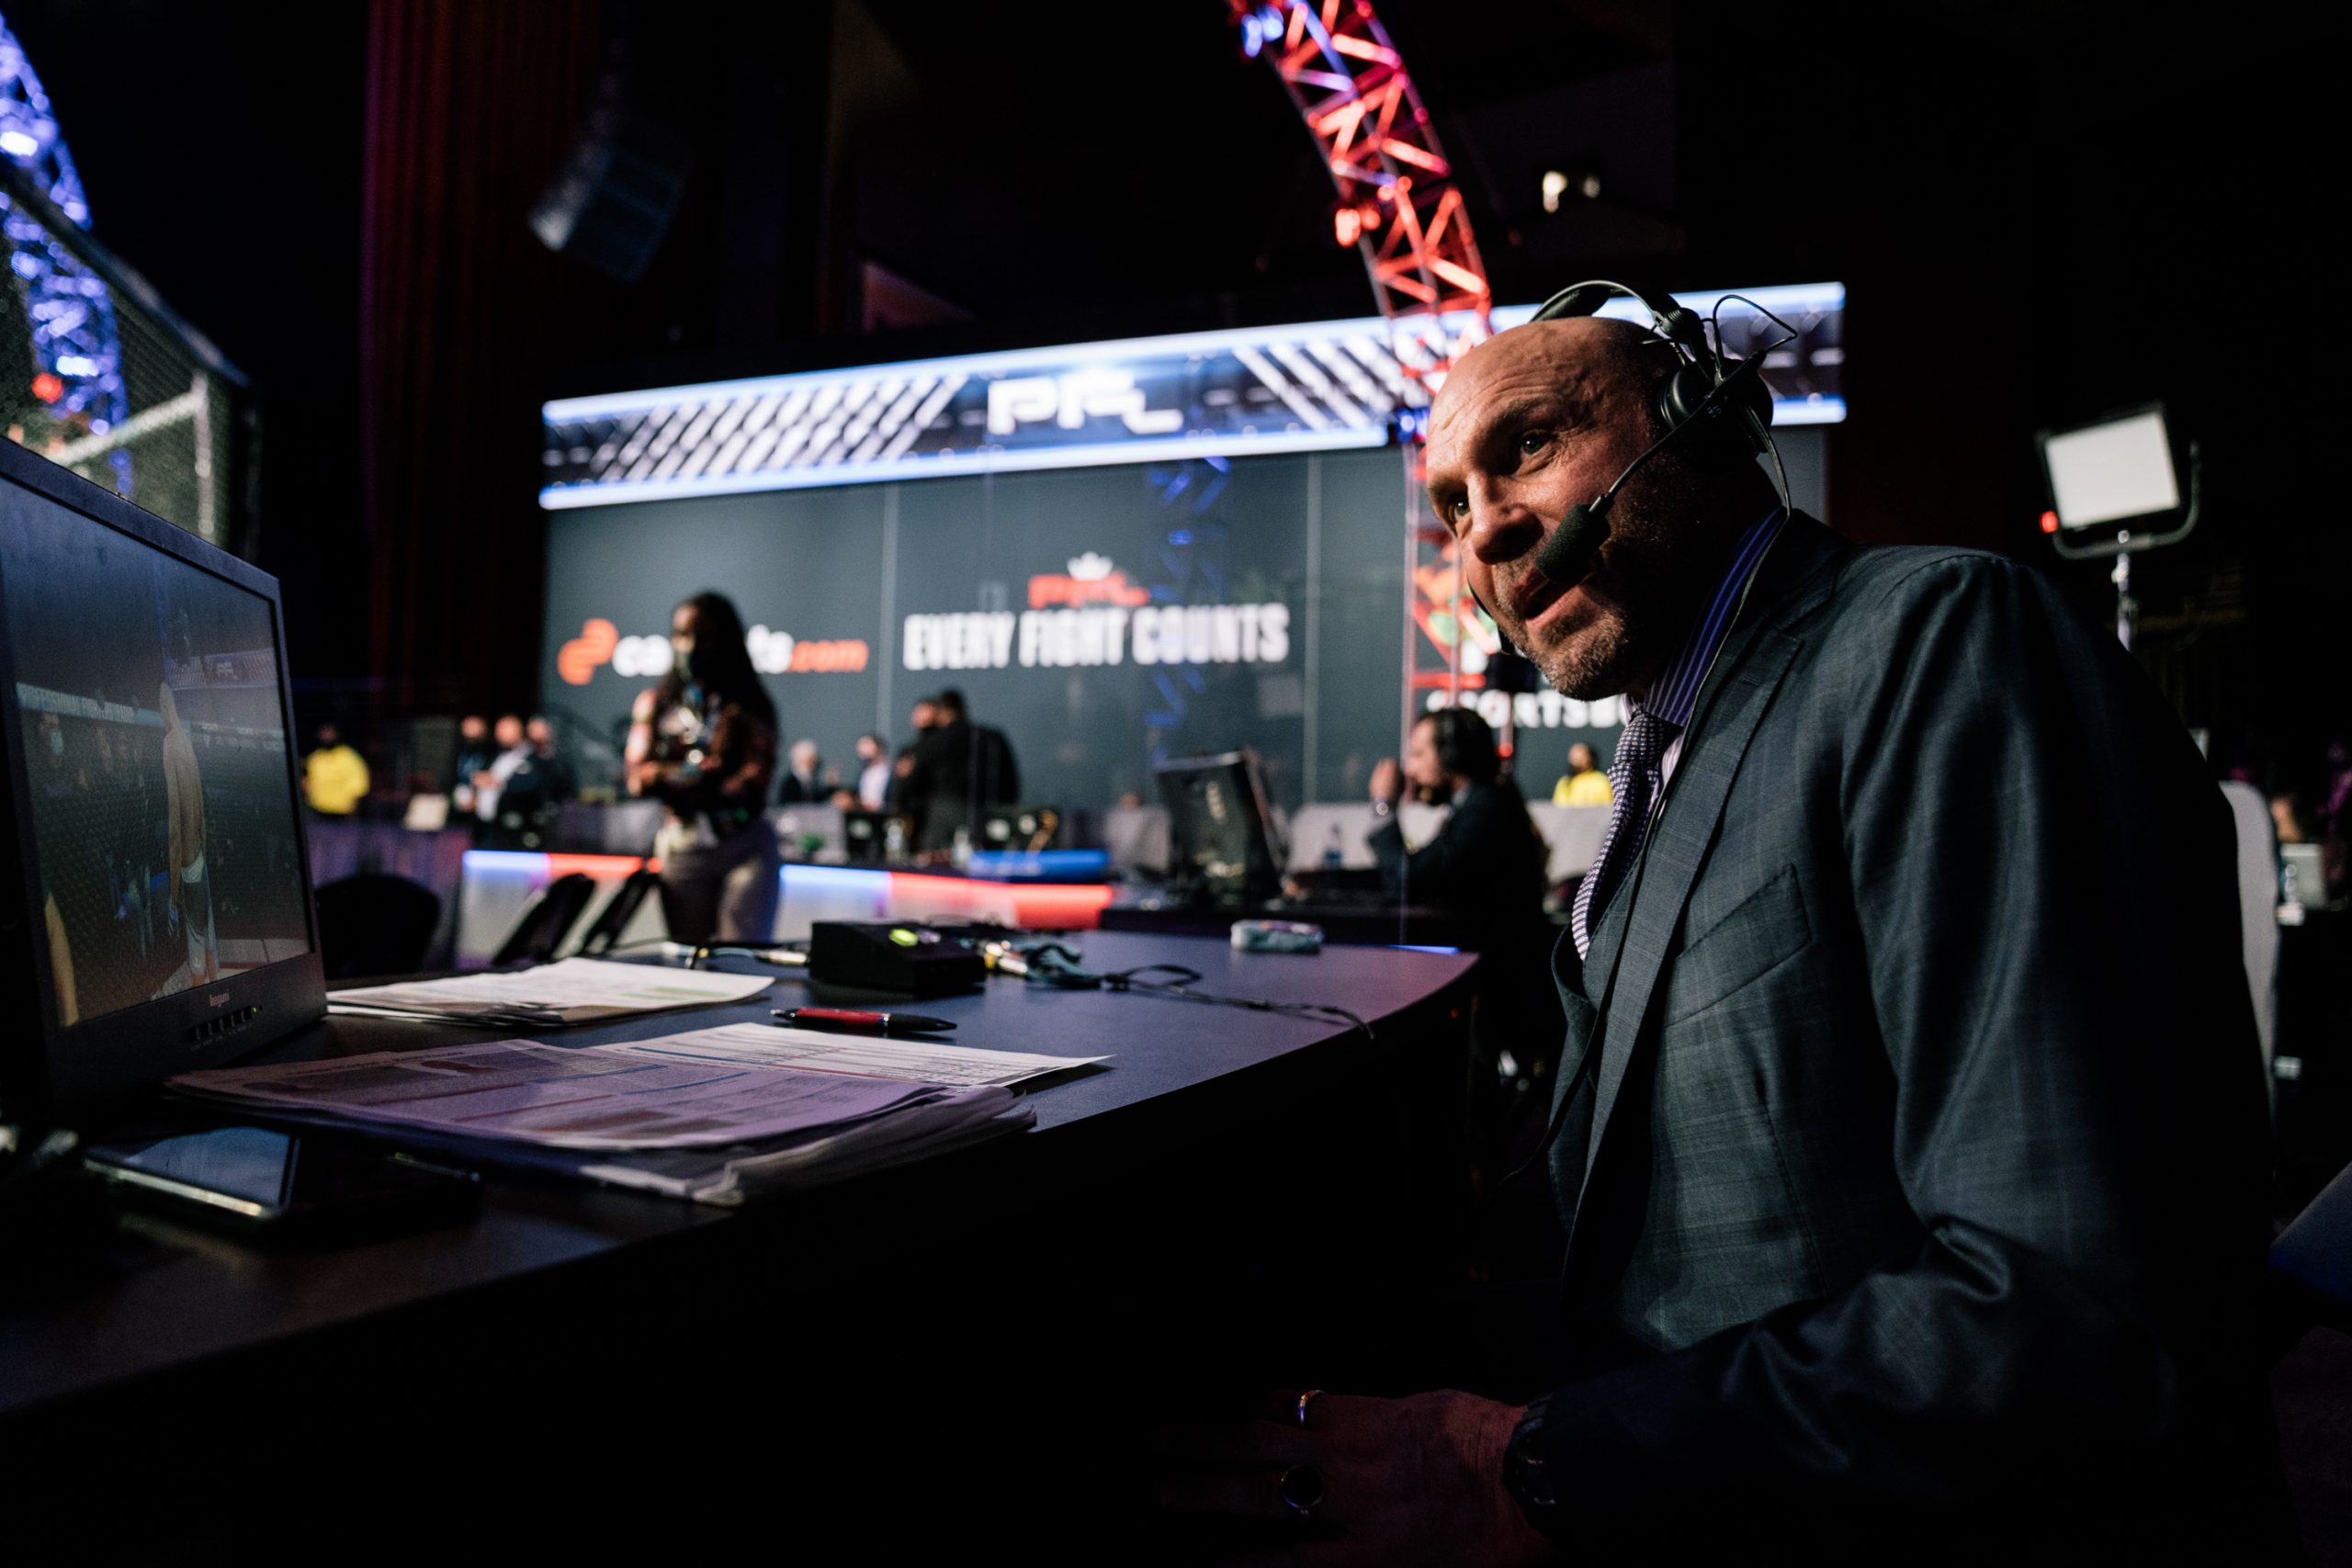 Inside the 'SmartCage': Data Sits at the Center of the Professional Fighters  League Universe